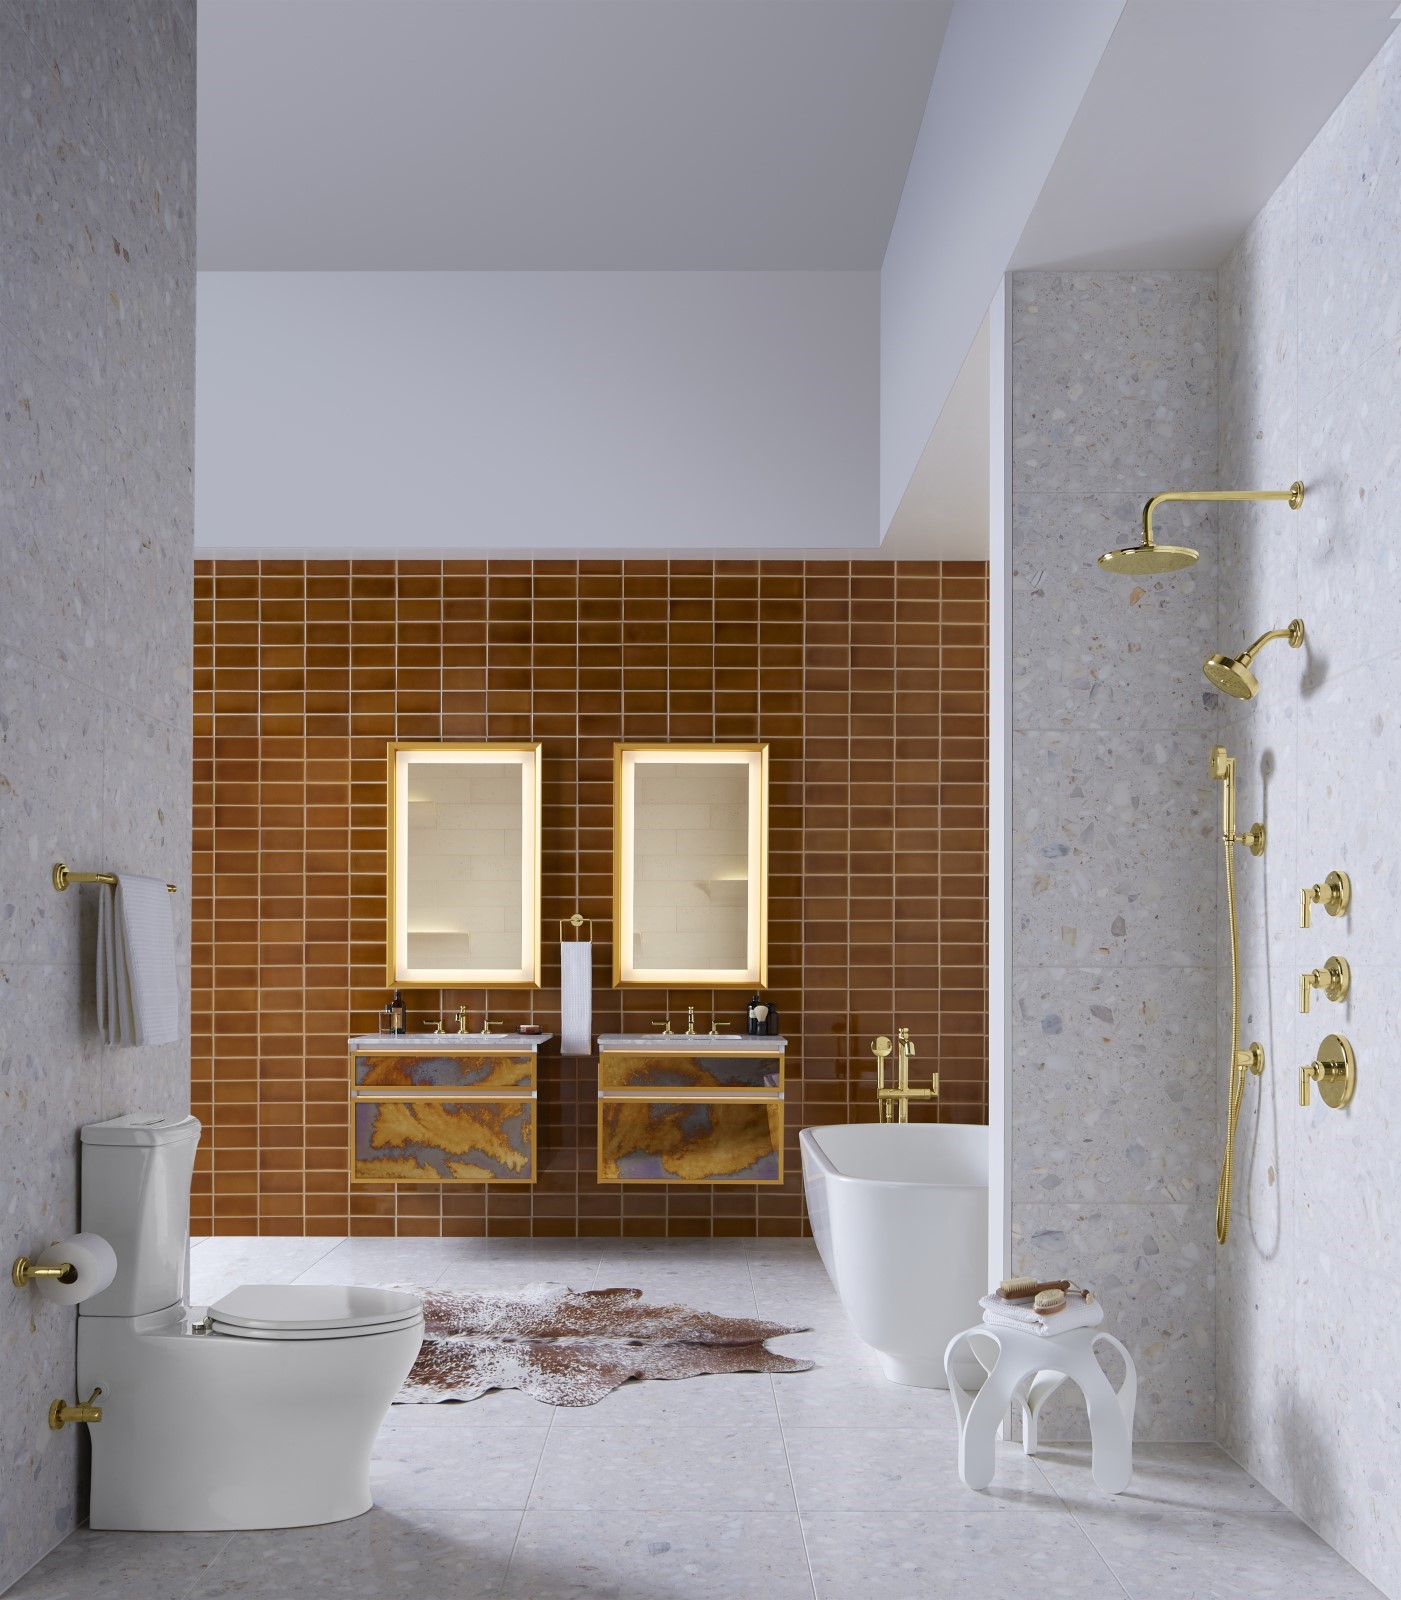 How to tile a bathroom wall for beginners?